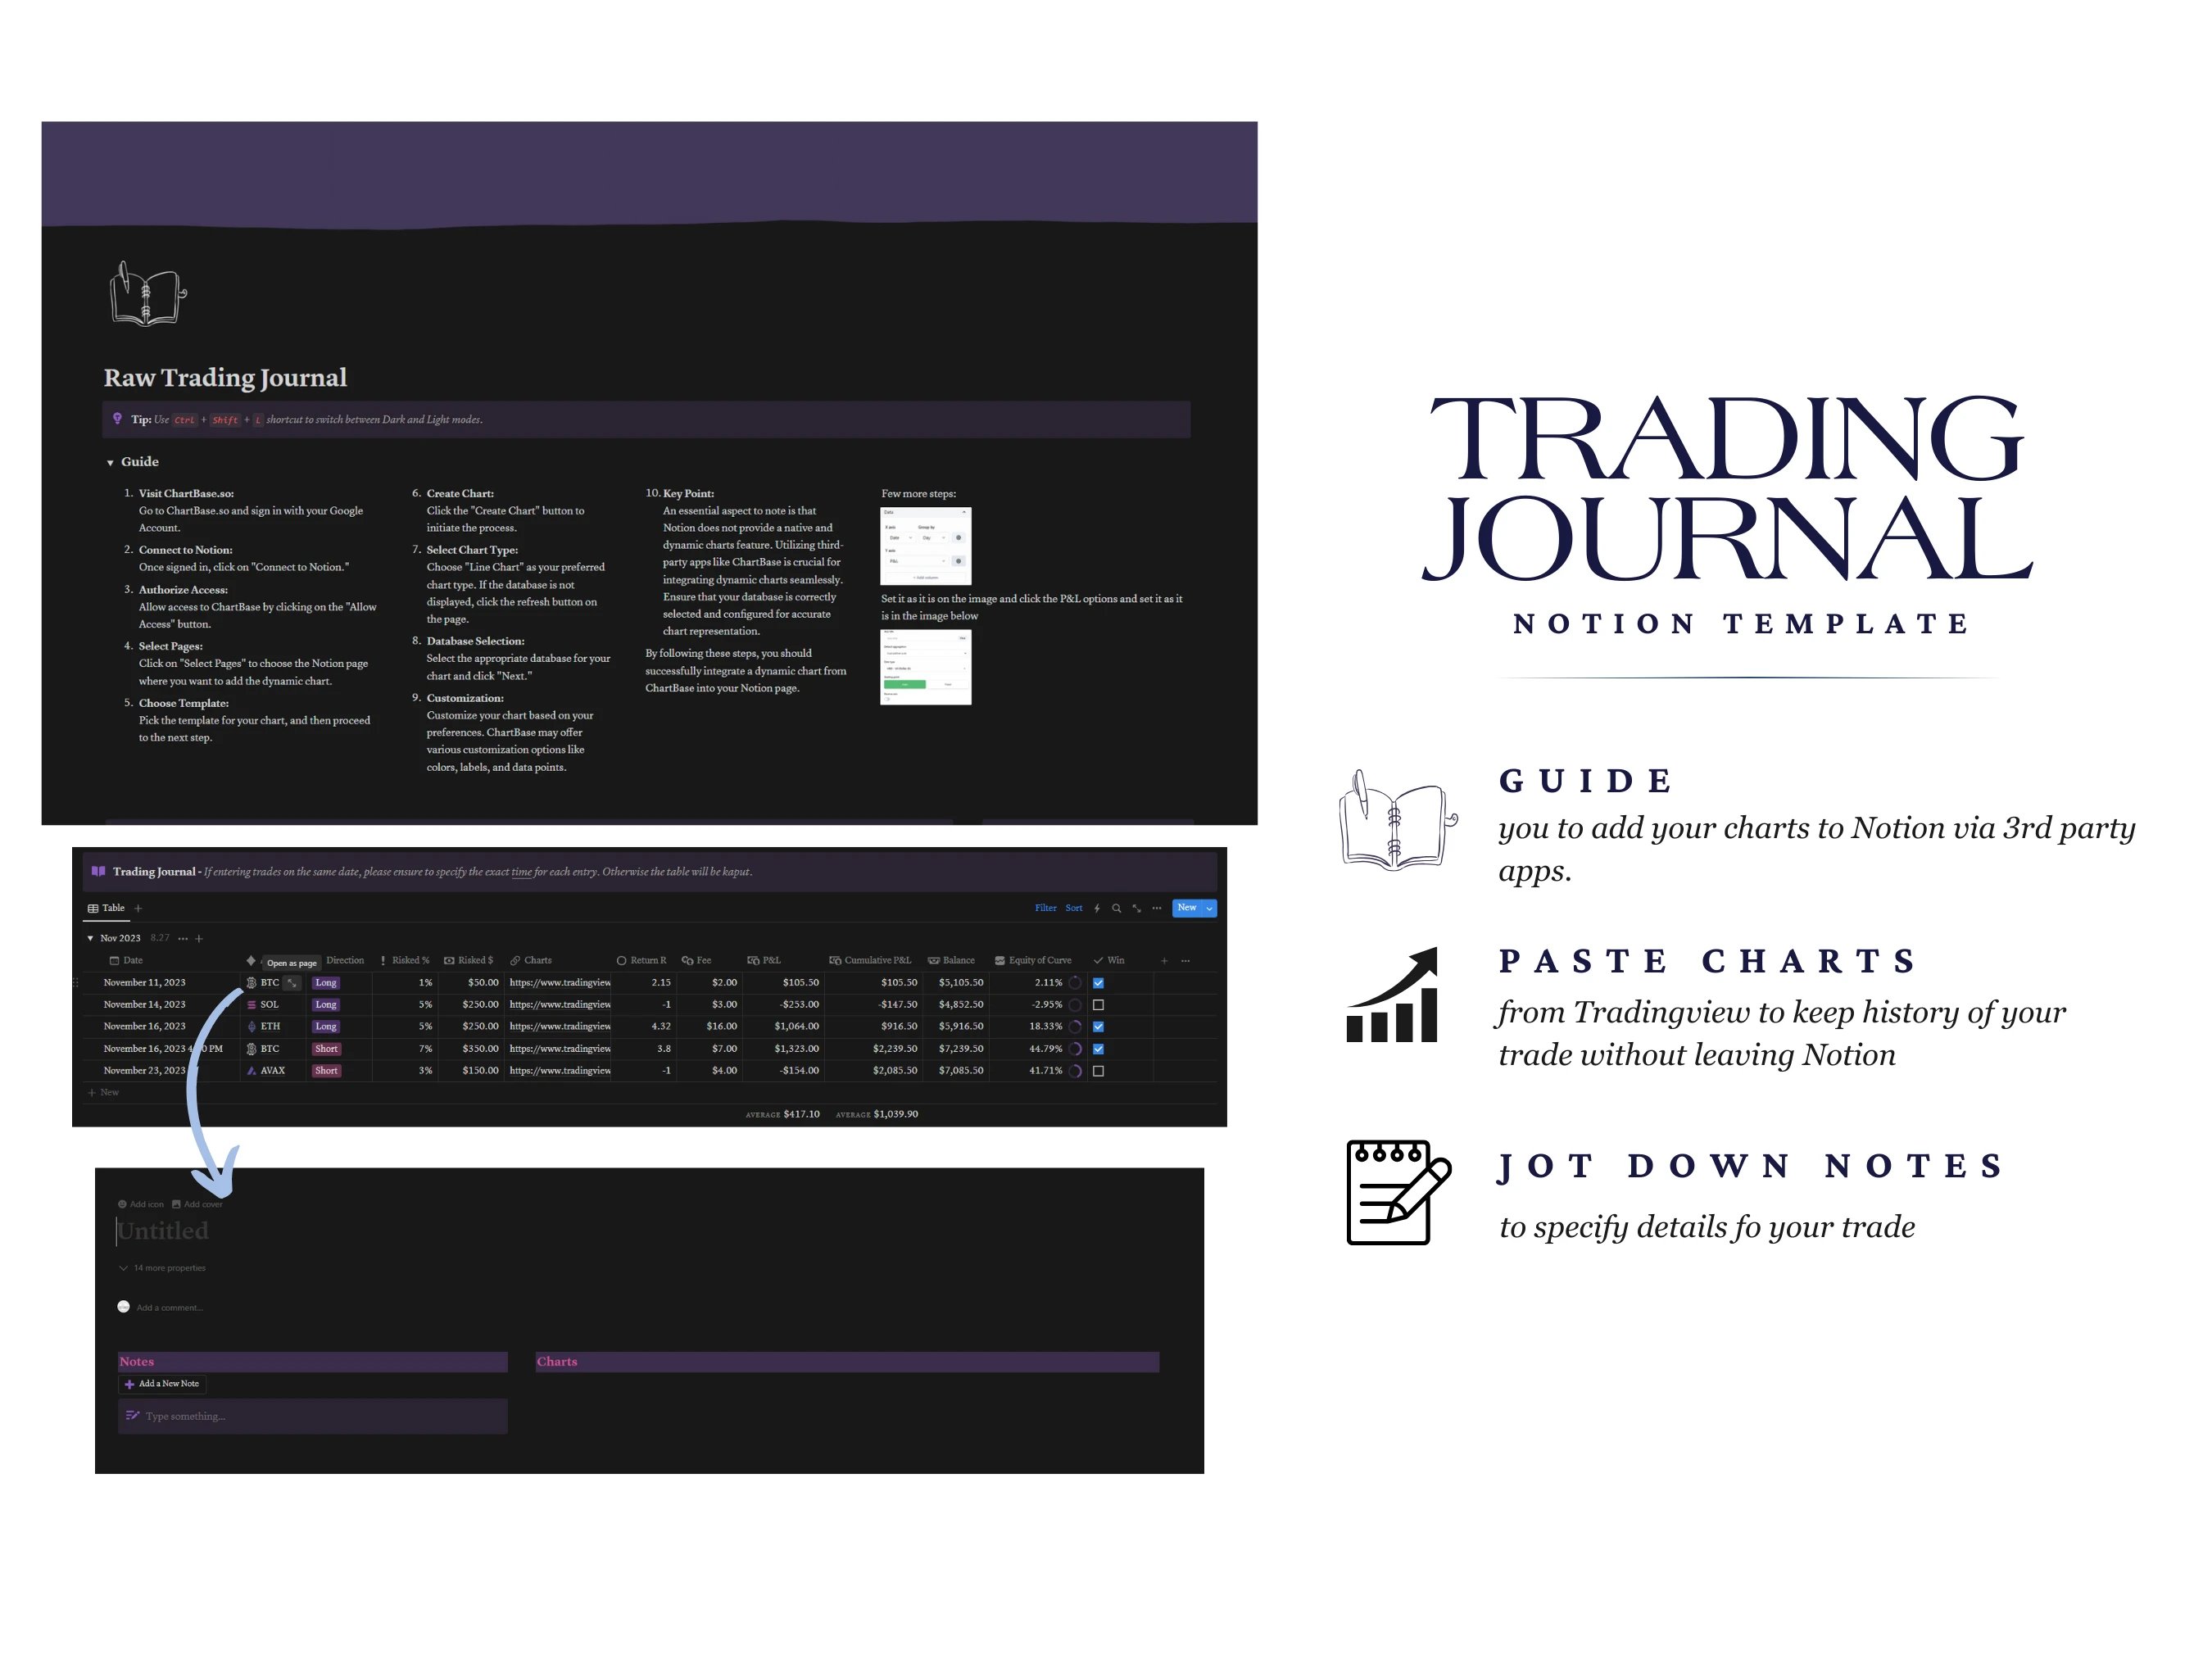 An easy-to-use Notion template made for keeping track of your trading activities, setting and monitoring your trading goals, and helping you understand and improve your trading performance through analysis.